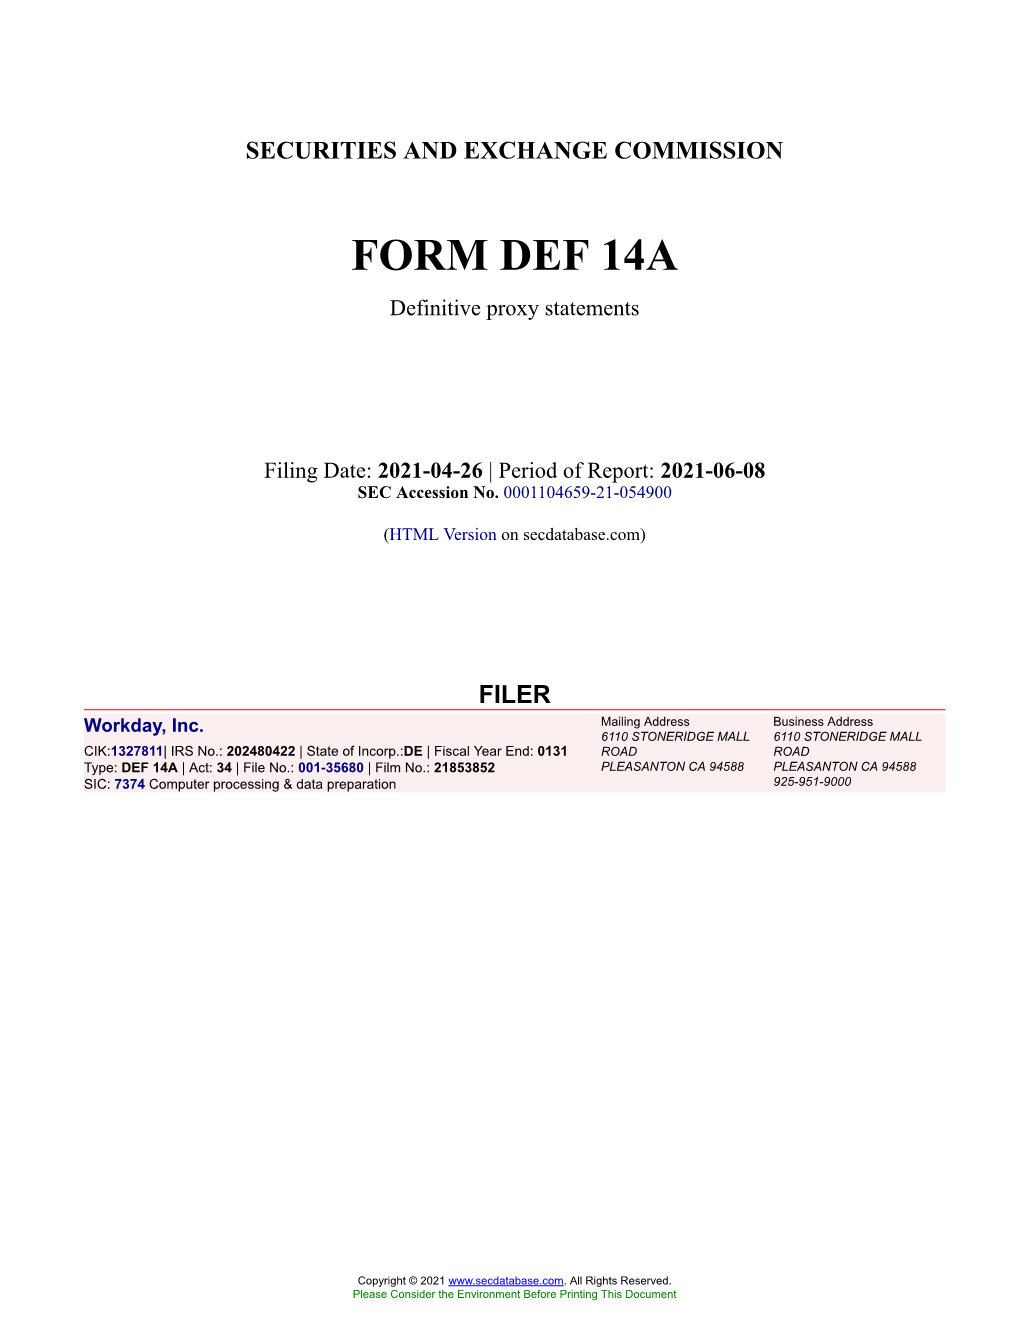 Workday, Inc. Form DEF 14A Filed 2021-04-26